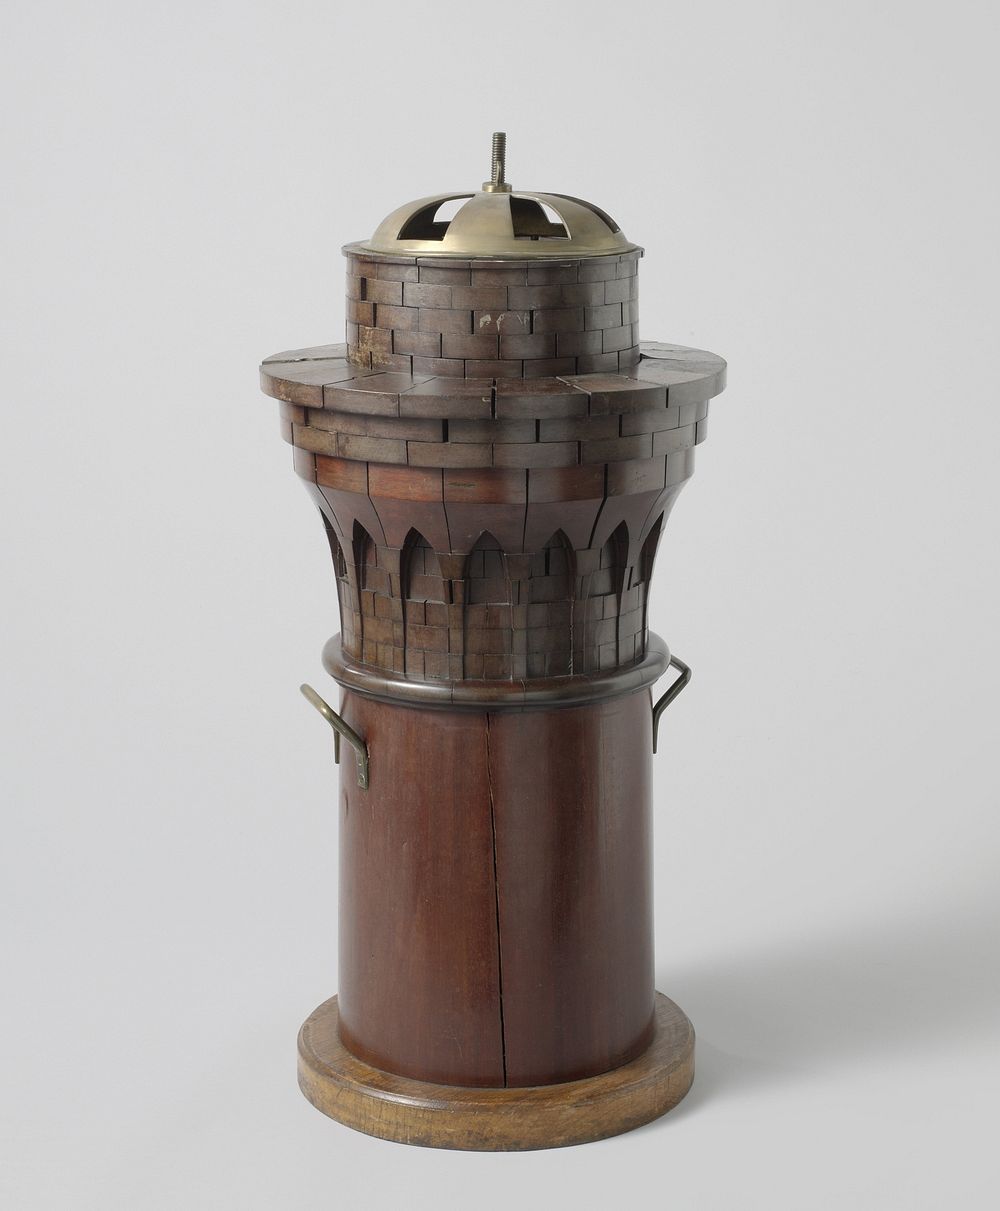 Model of the Capital of a Lighthouse (1834) by Petrus van der Loo